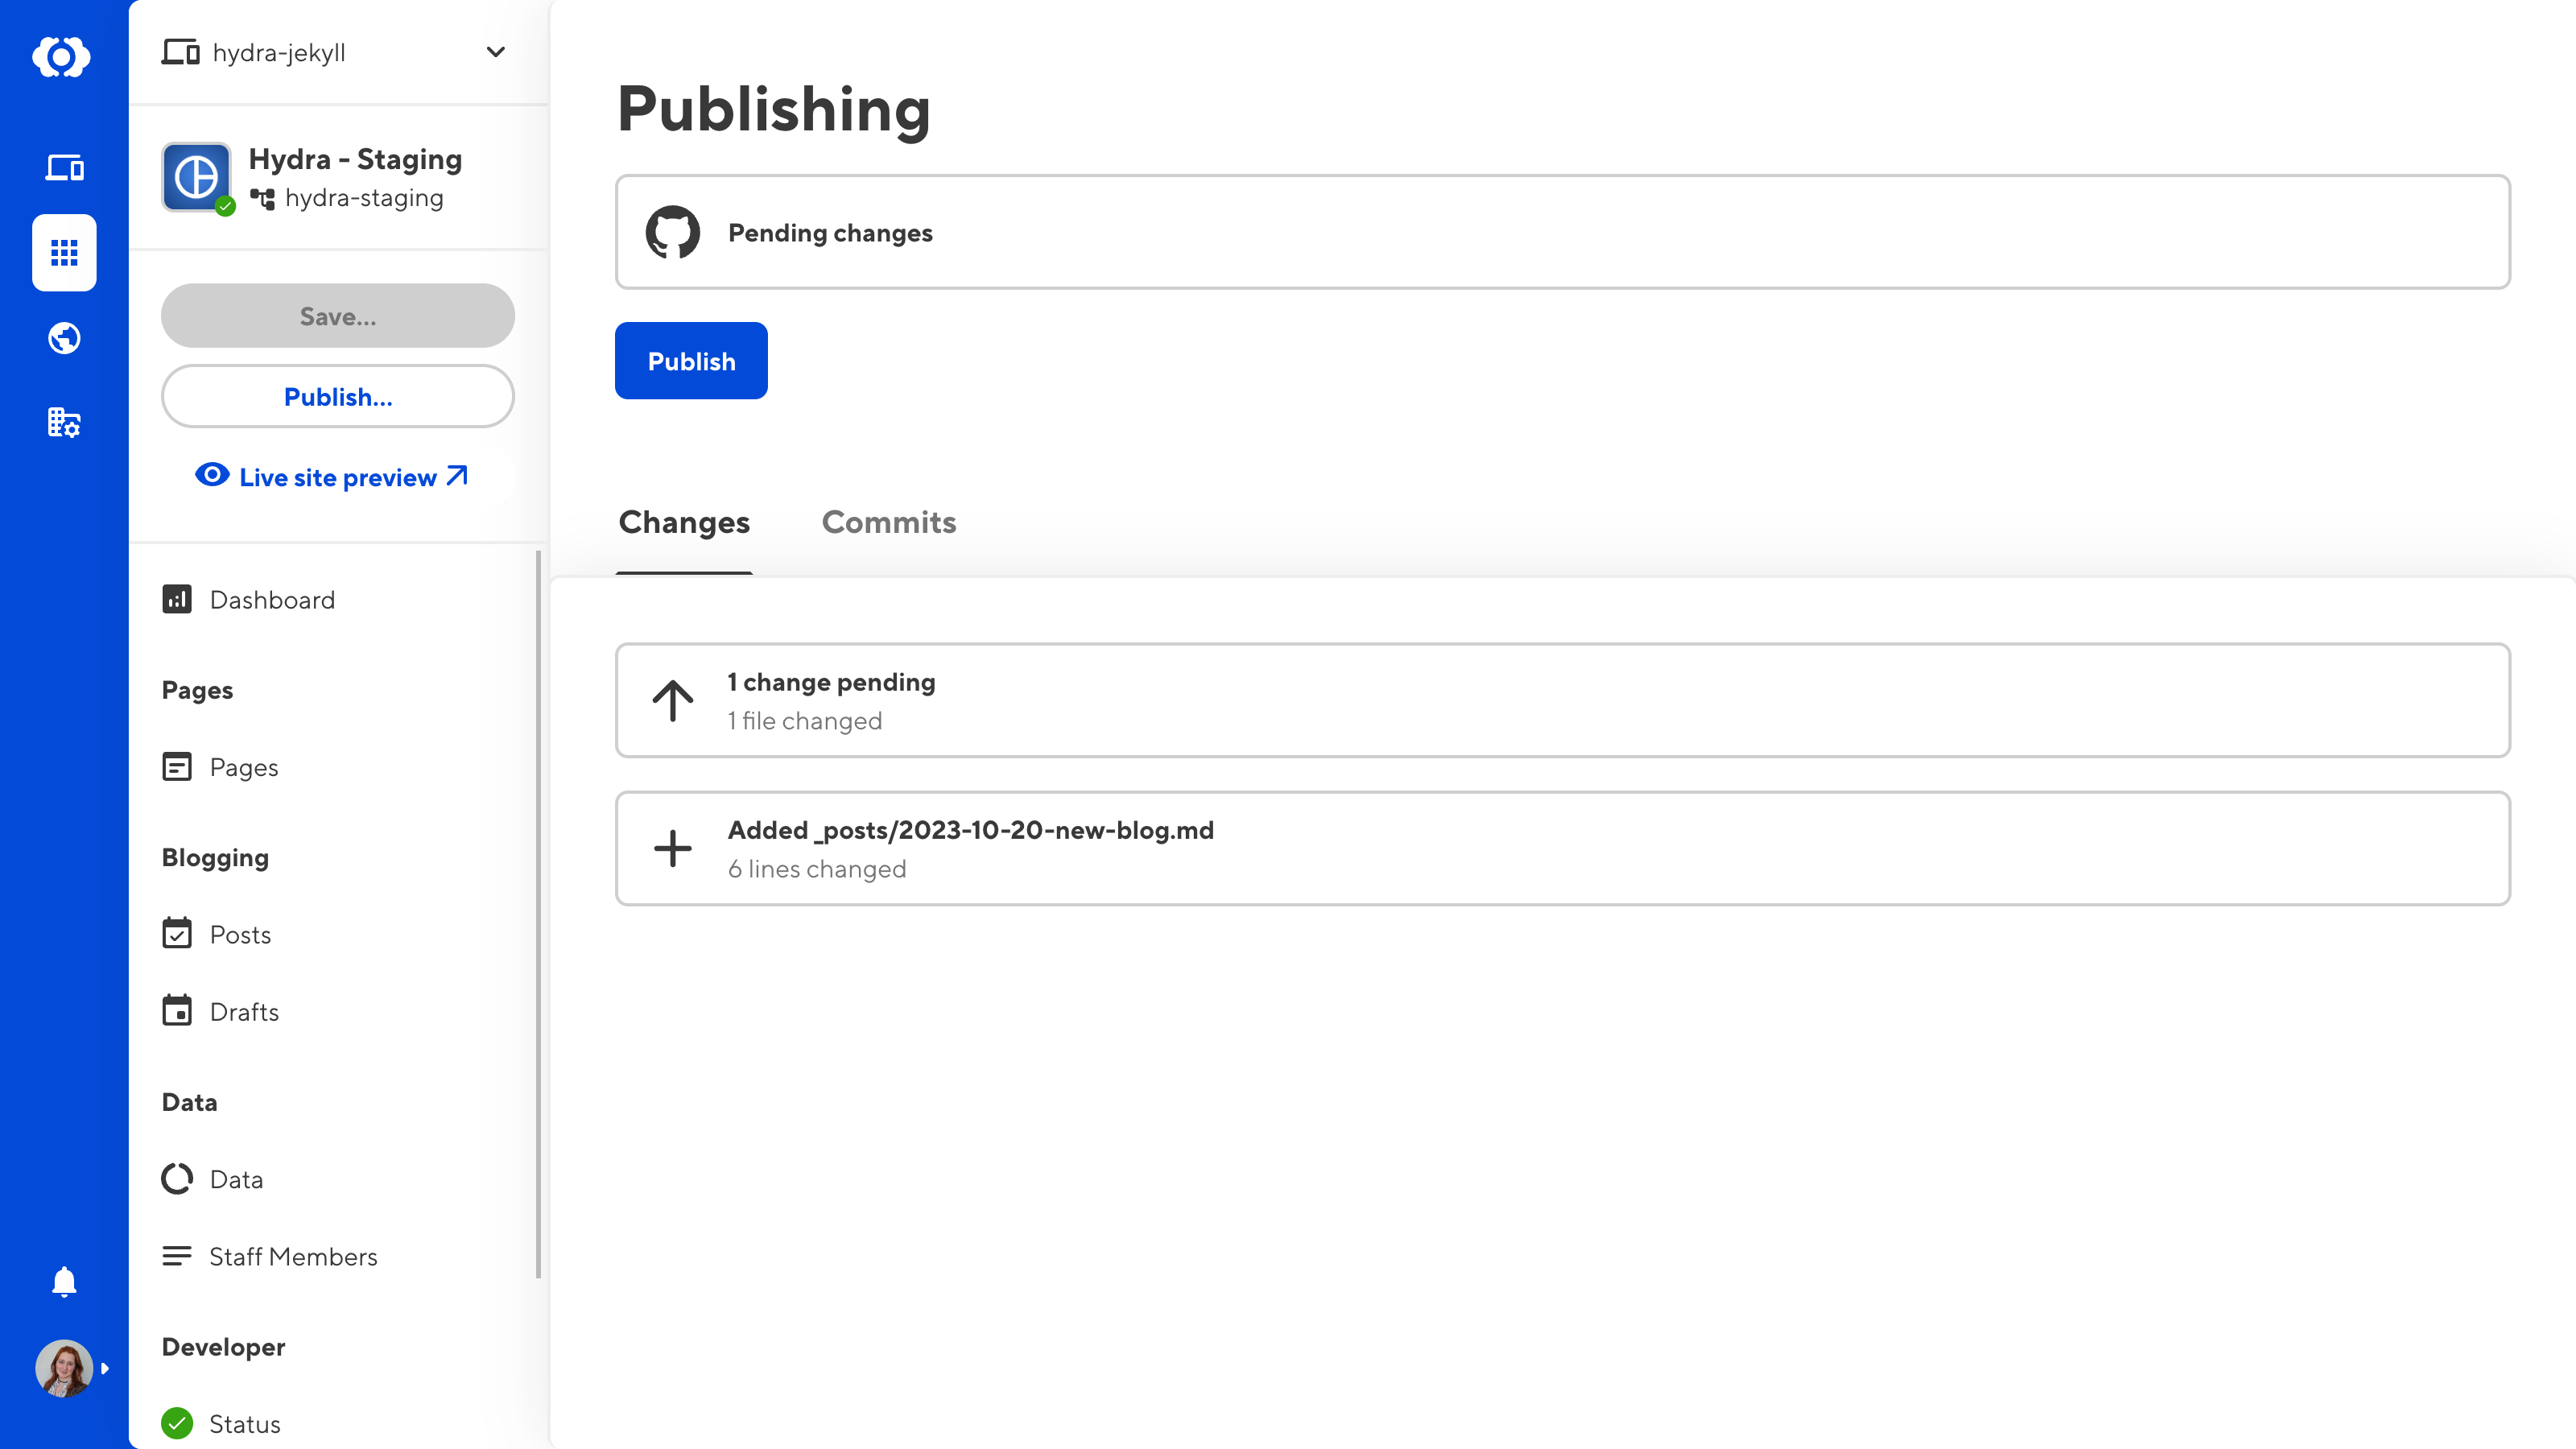 A screenshot of the CloudCannon app shows the Publishing page with a button to Publish pending changes.